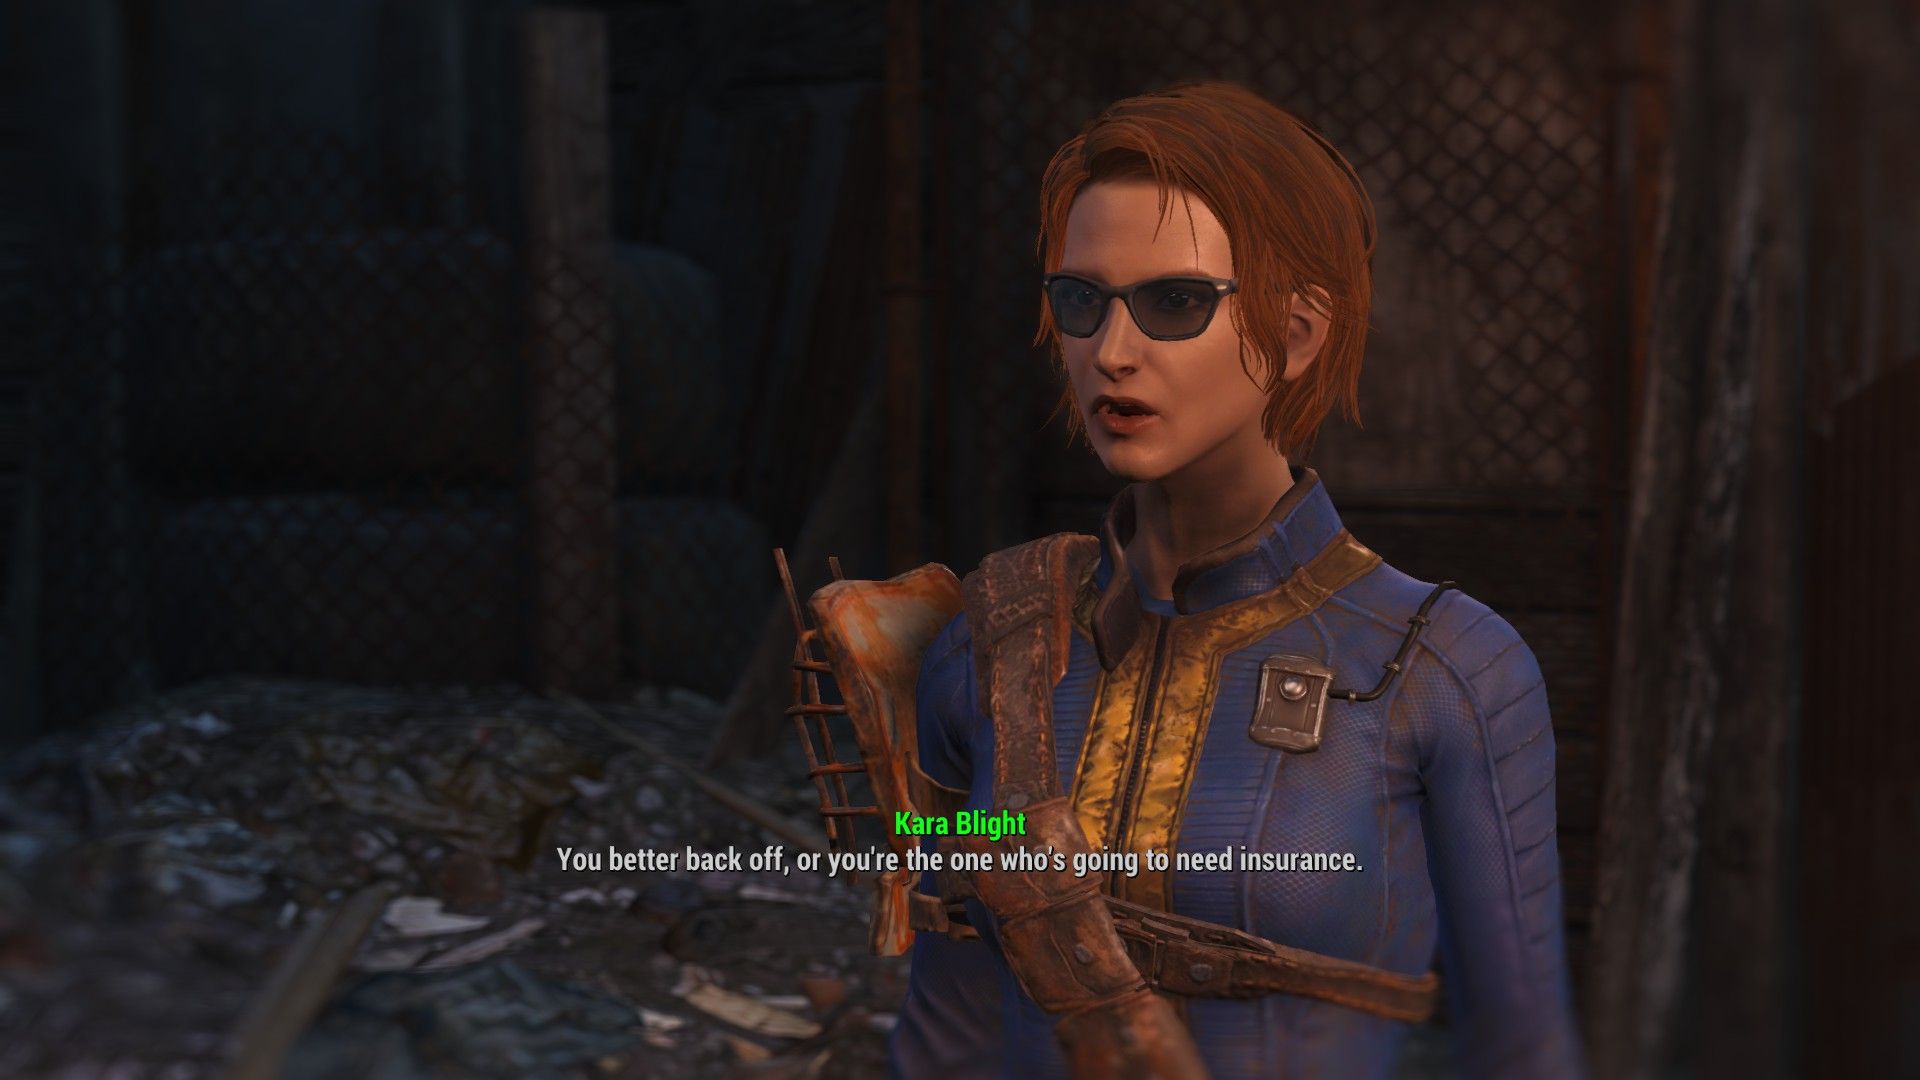 Fallout 4 Review: Should You Board The Hype Train? | OnRPG